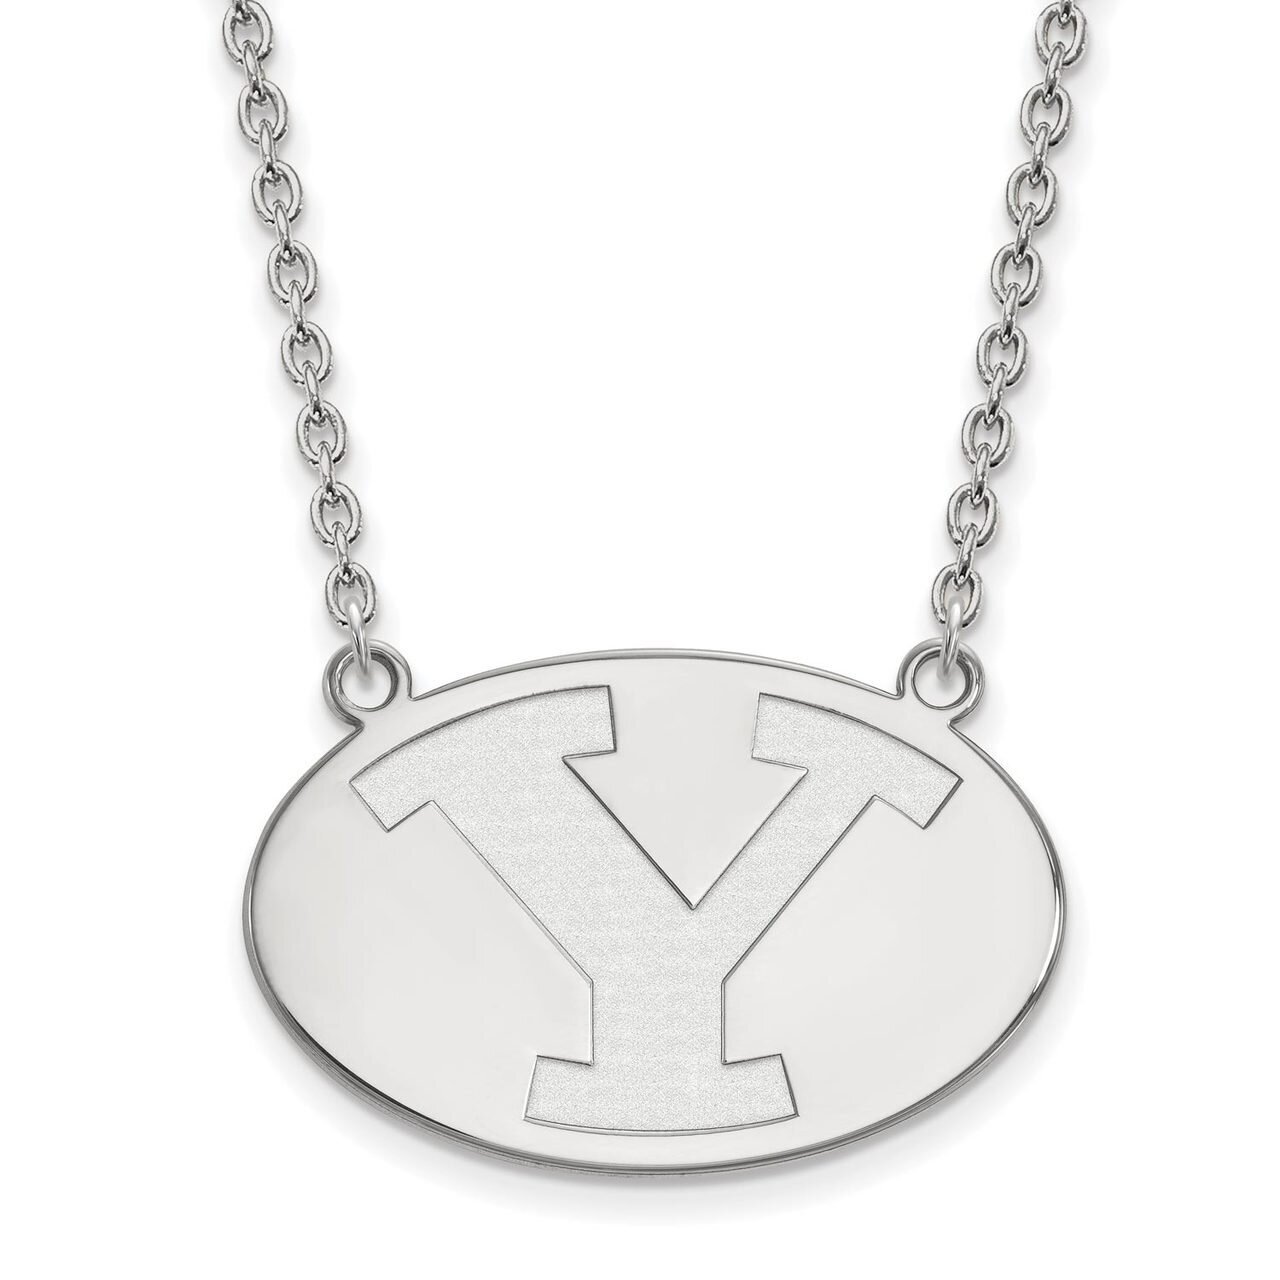 Brigham Young University Large Pendant with Chain Necklace 10k White Gold 1W010BYU-18